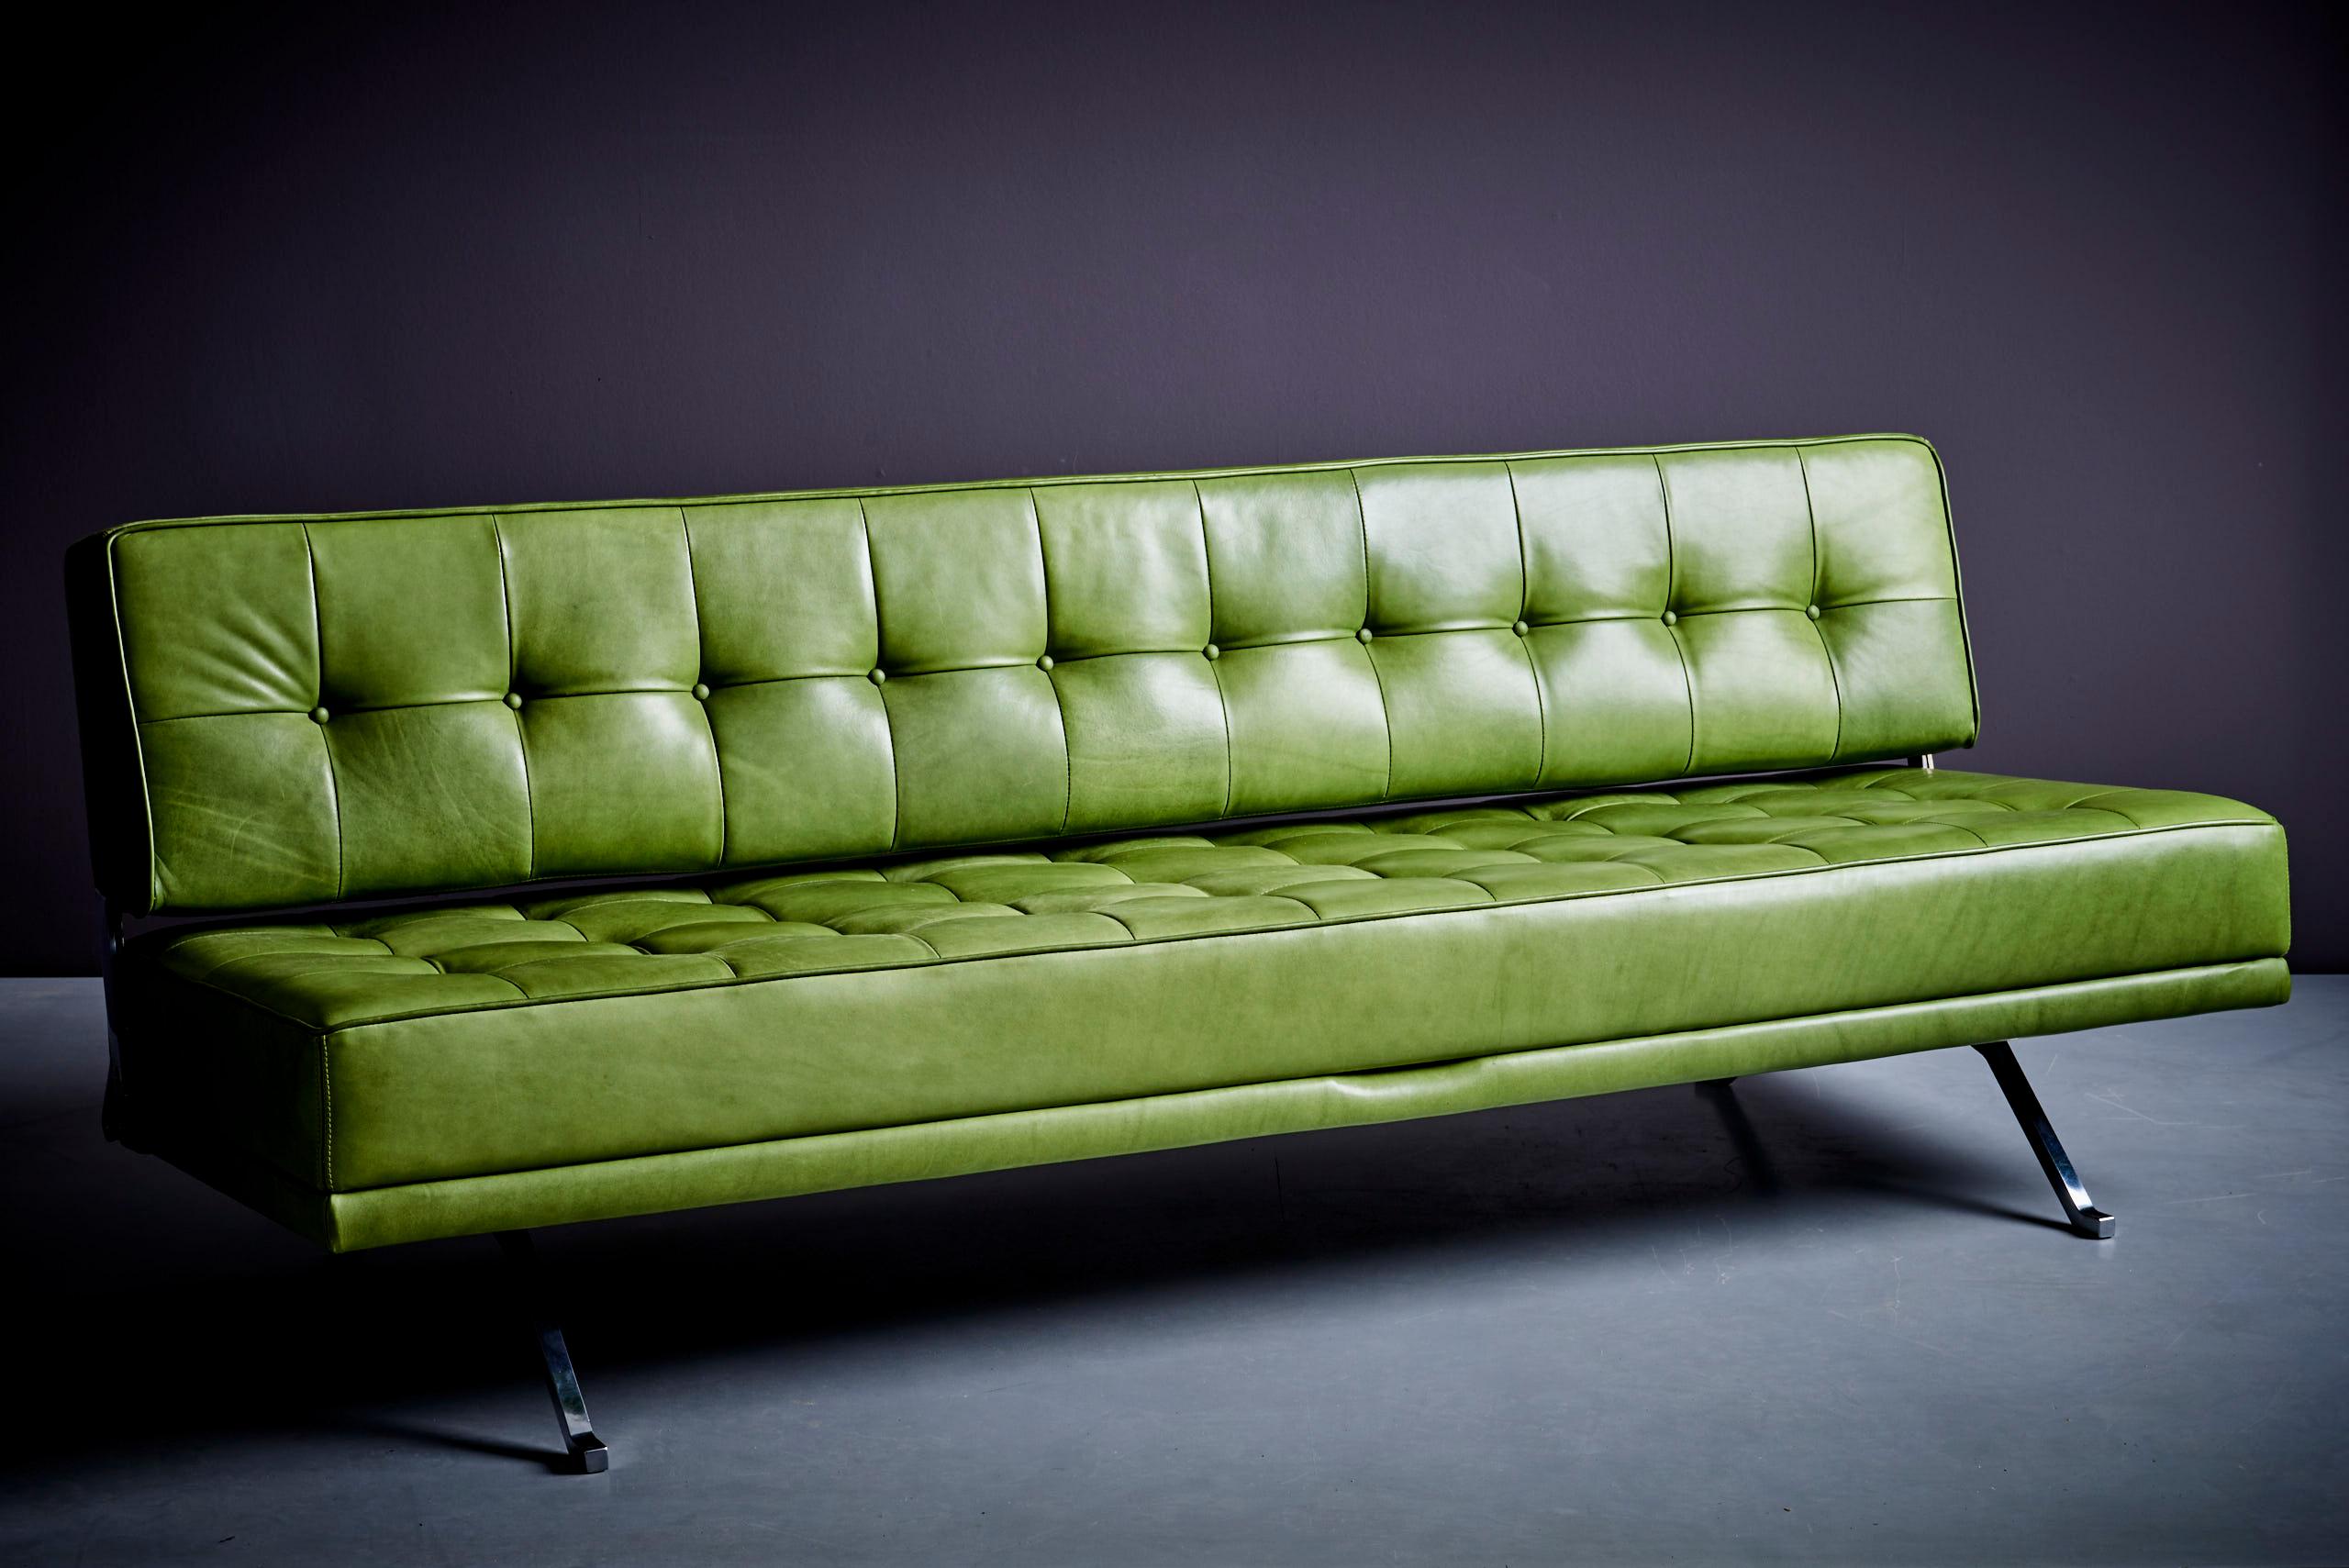 Reupholstered Johannes Spalt Sofa Daybed for Wittmann, 1960s in green leather  For Sale 1